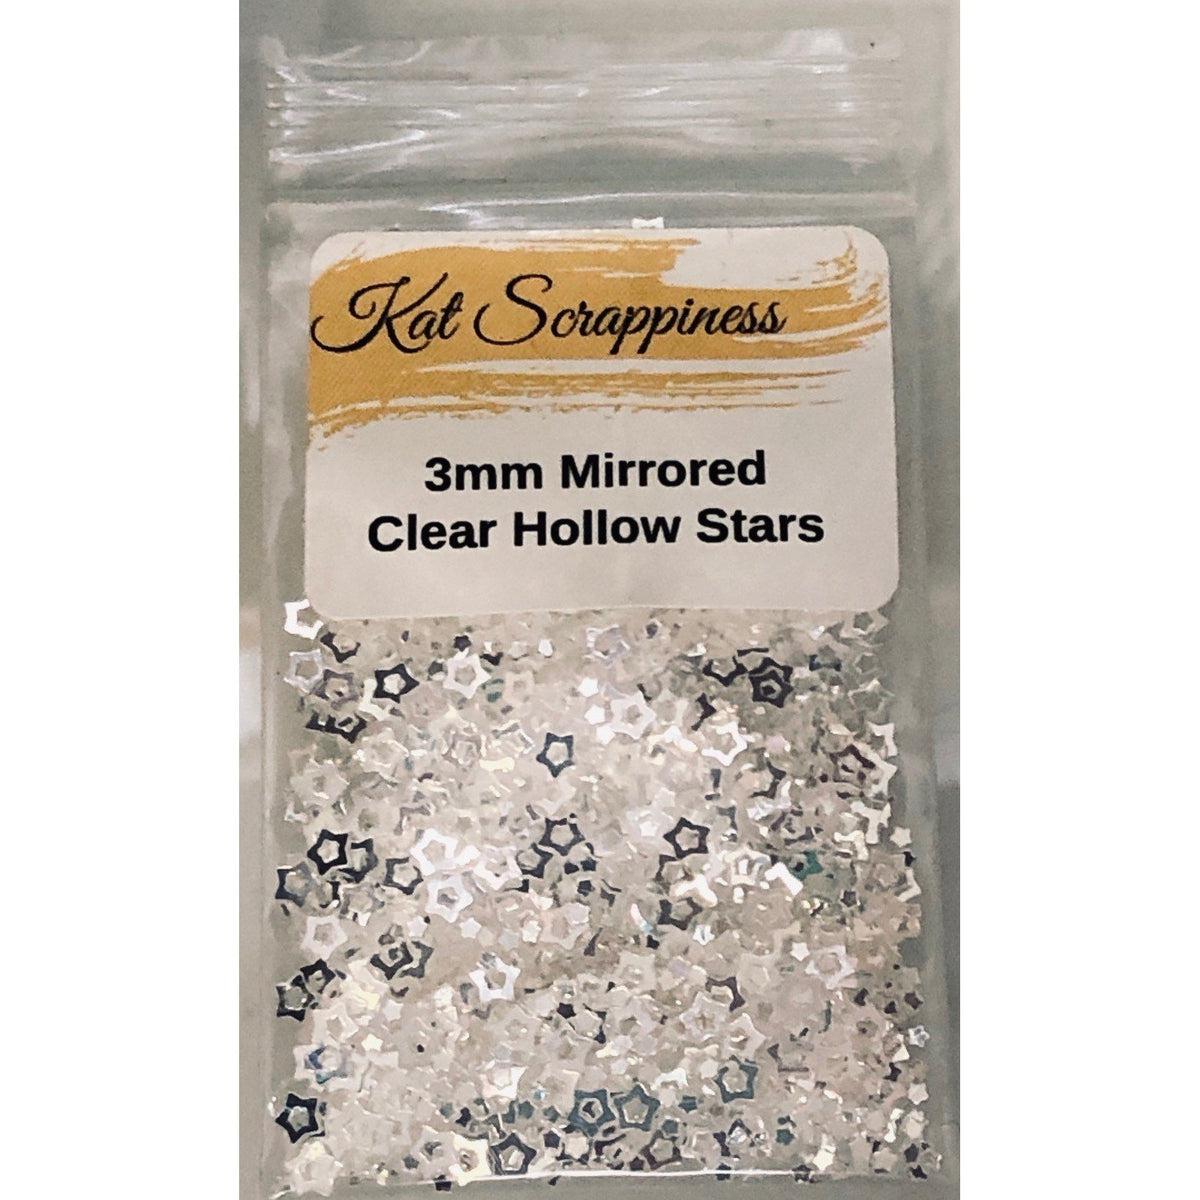 3mm Mirrored Clear Hollow Star Sequins - Kat Scrappiness